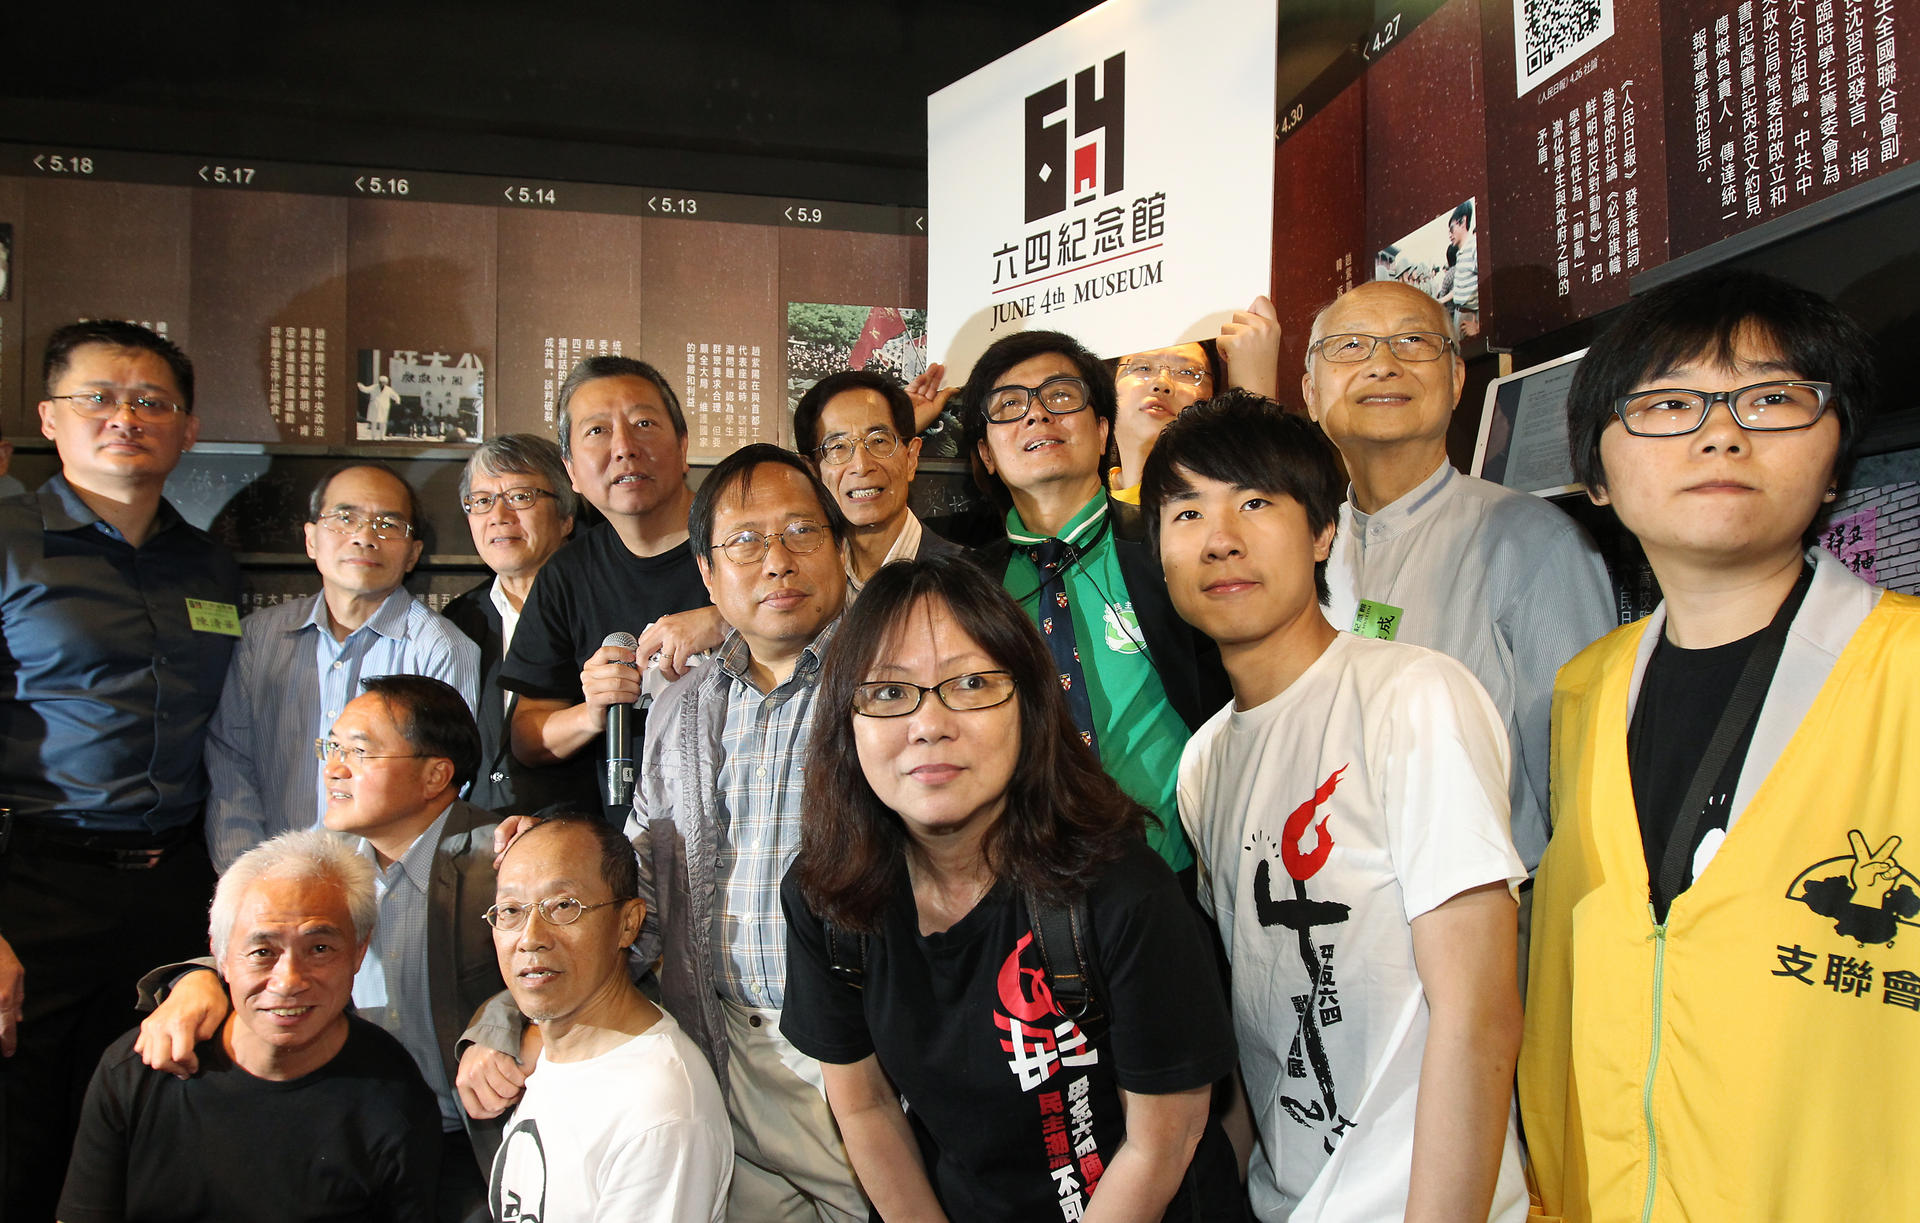 Guests celebrate the museum's opening in Foo Hoo Centre, Tsim Sha Tsui. Photo: May Tse